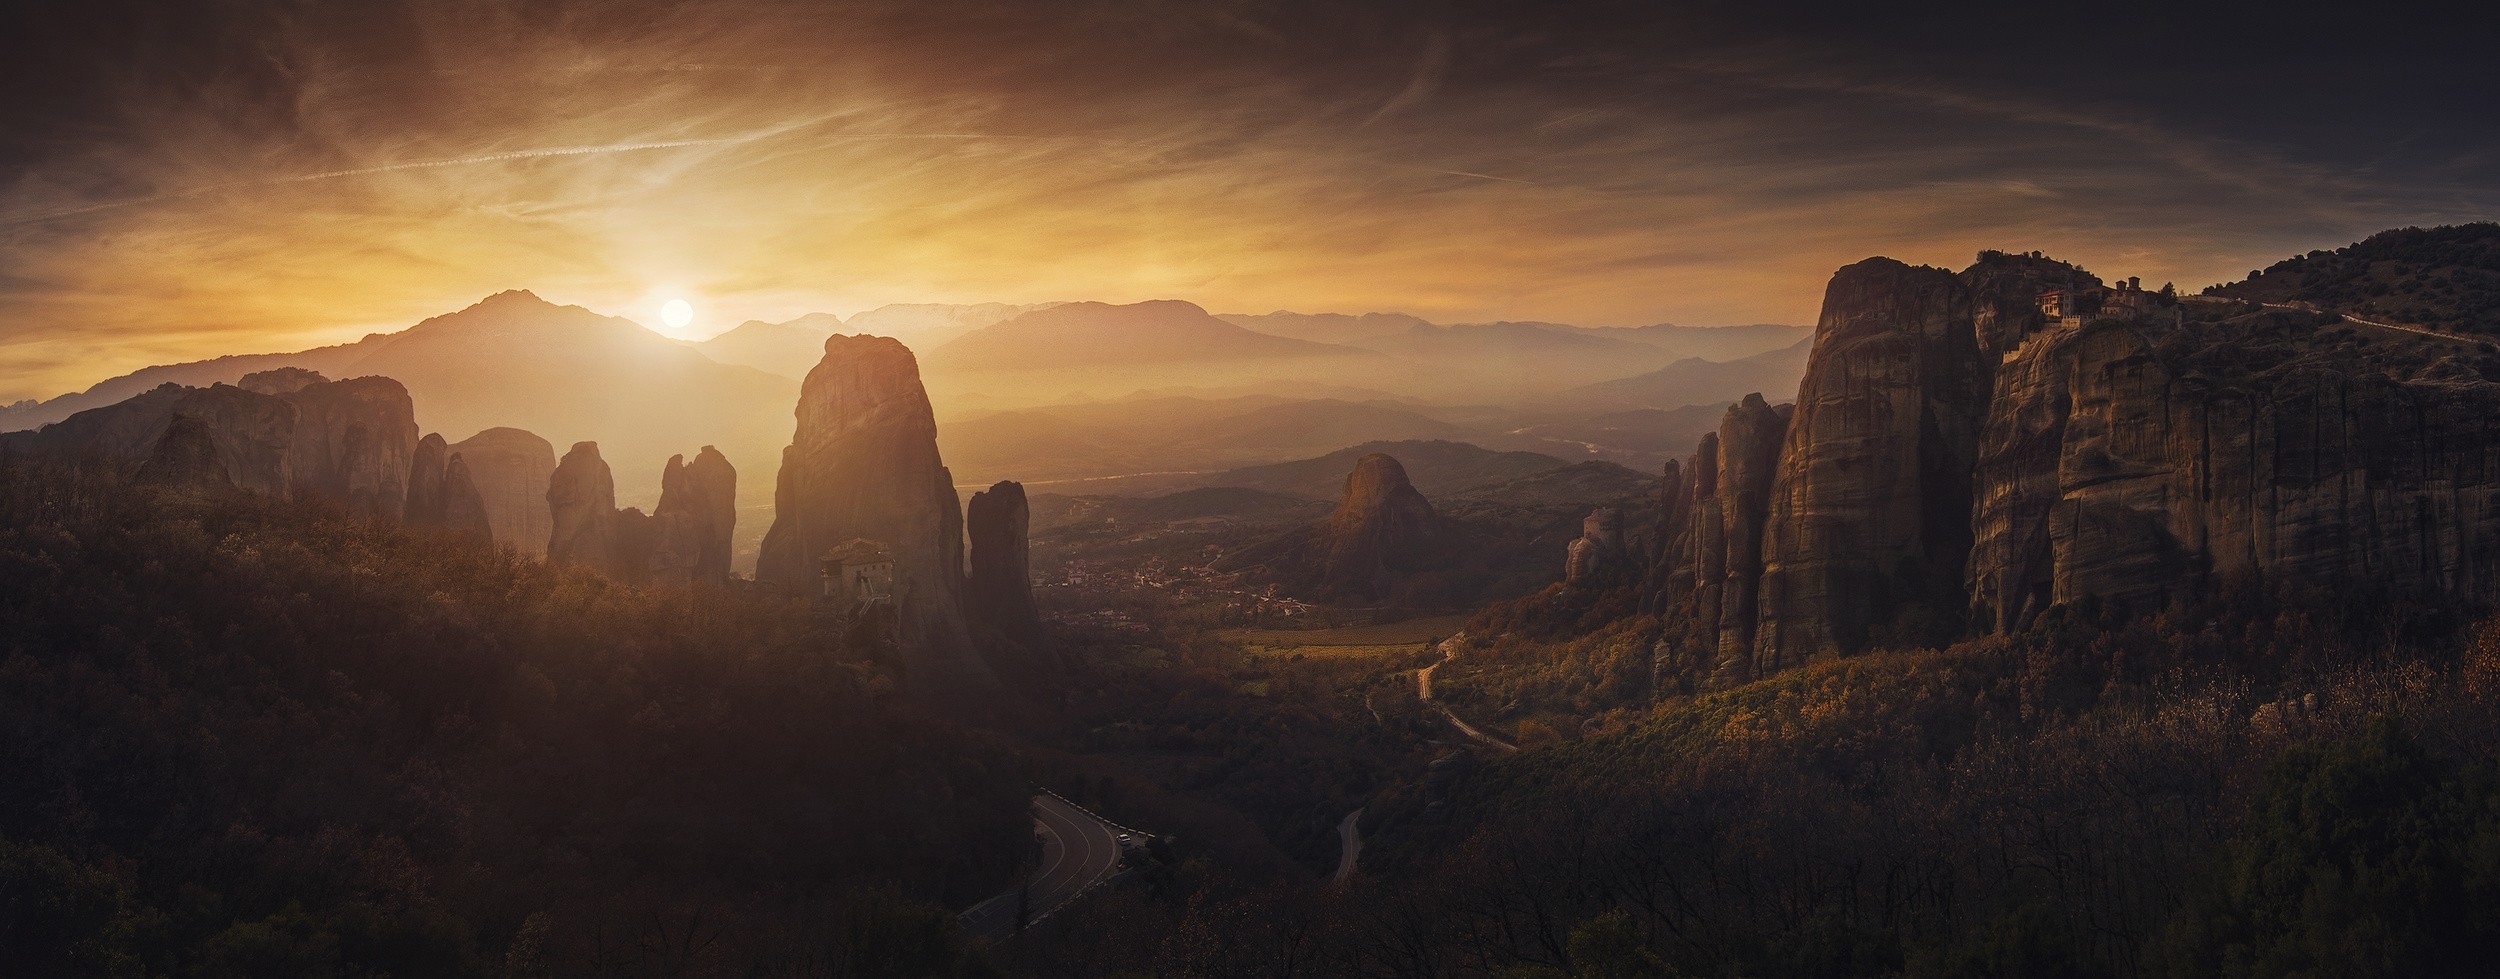 General 2500x979 nature photography landscape panorama sunset monastery rocks mountains valley road sky mist Meteora Greece